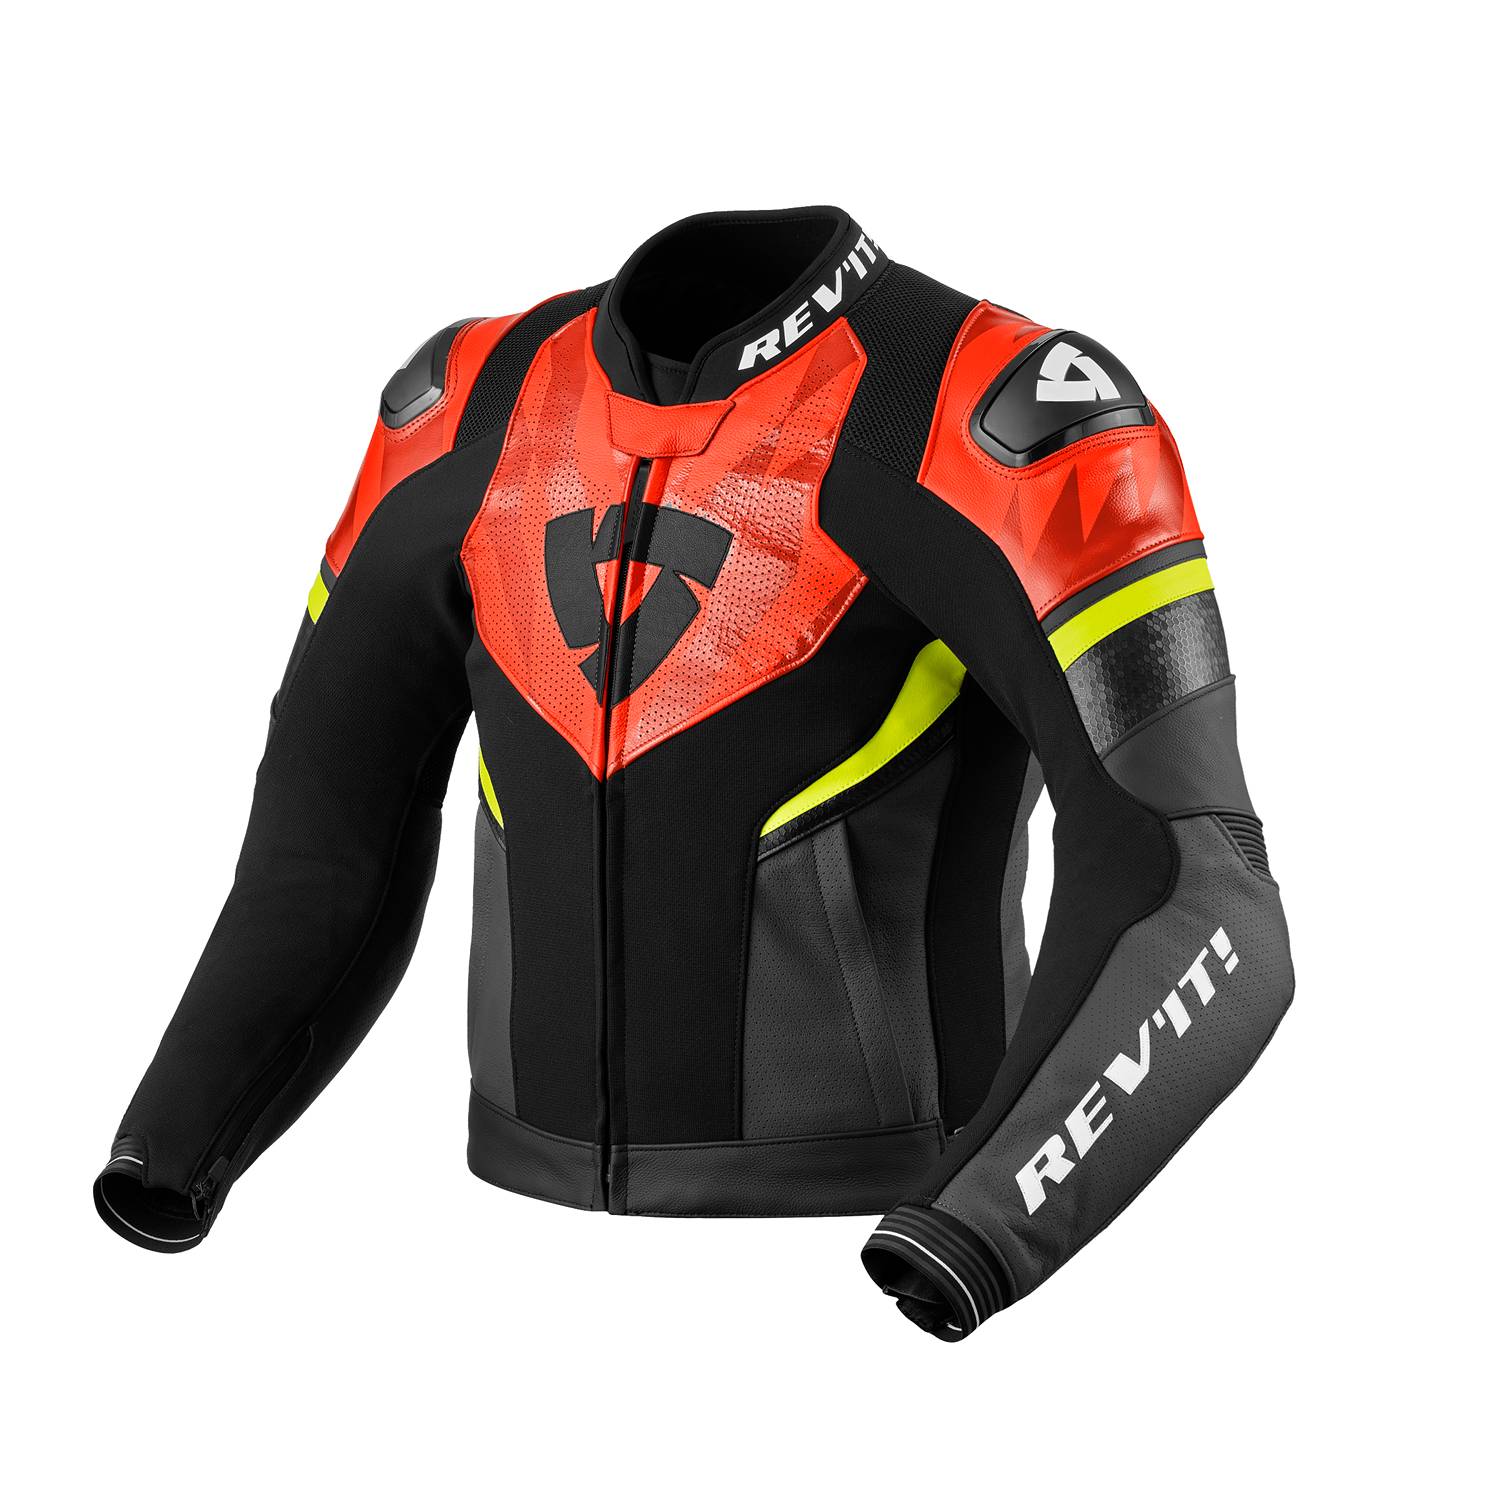 Image of REV'IT! Hyperspeed 2 Air Jacket Black Neon Red Size 54 ID 8700001358569